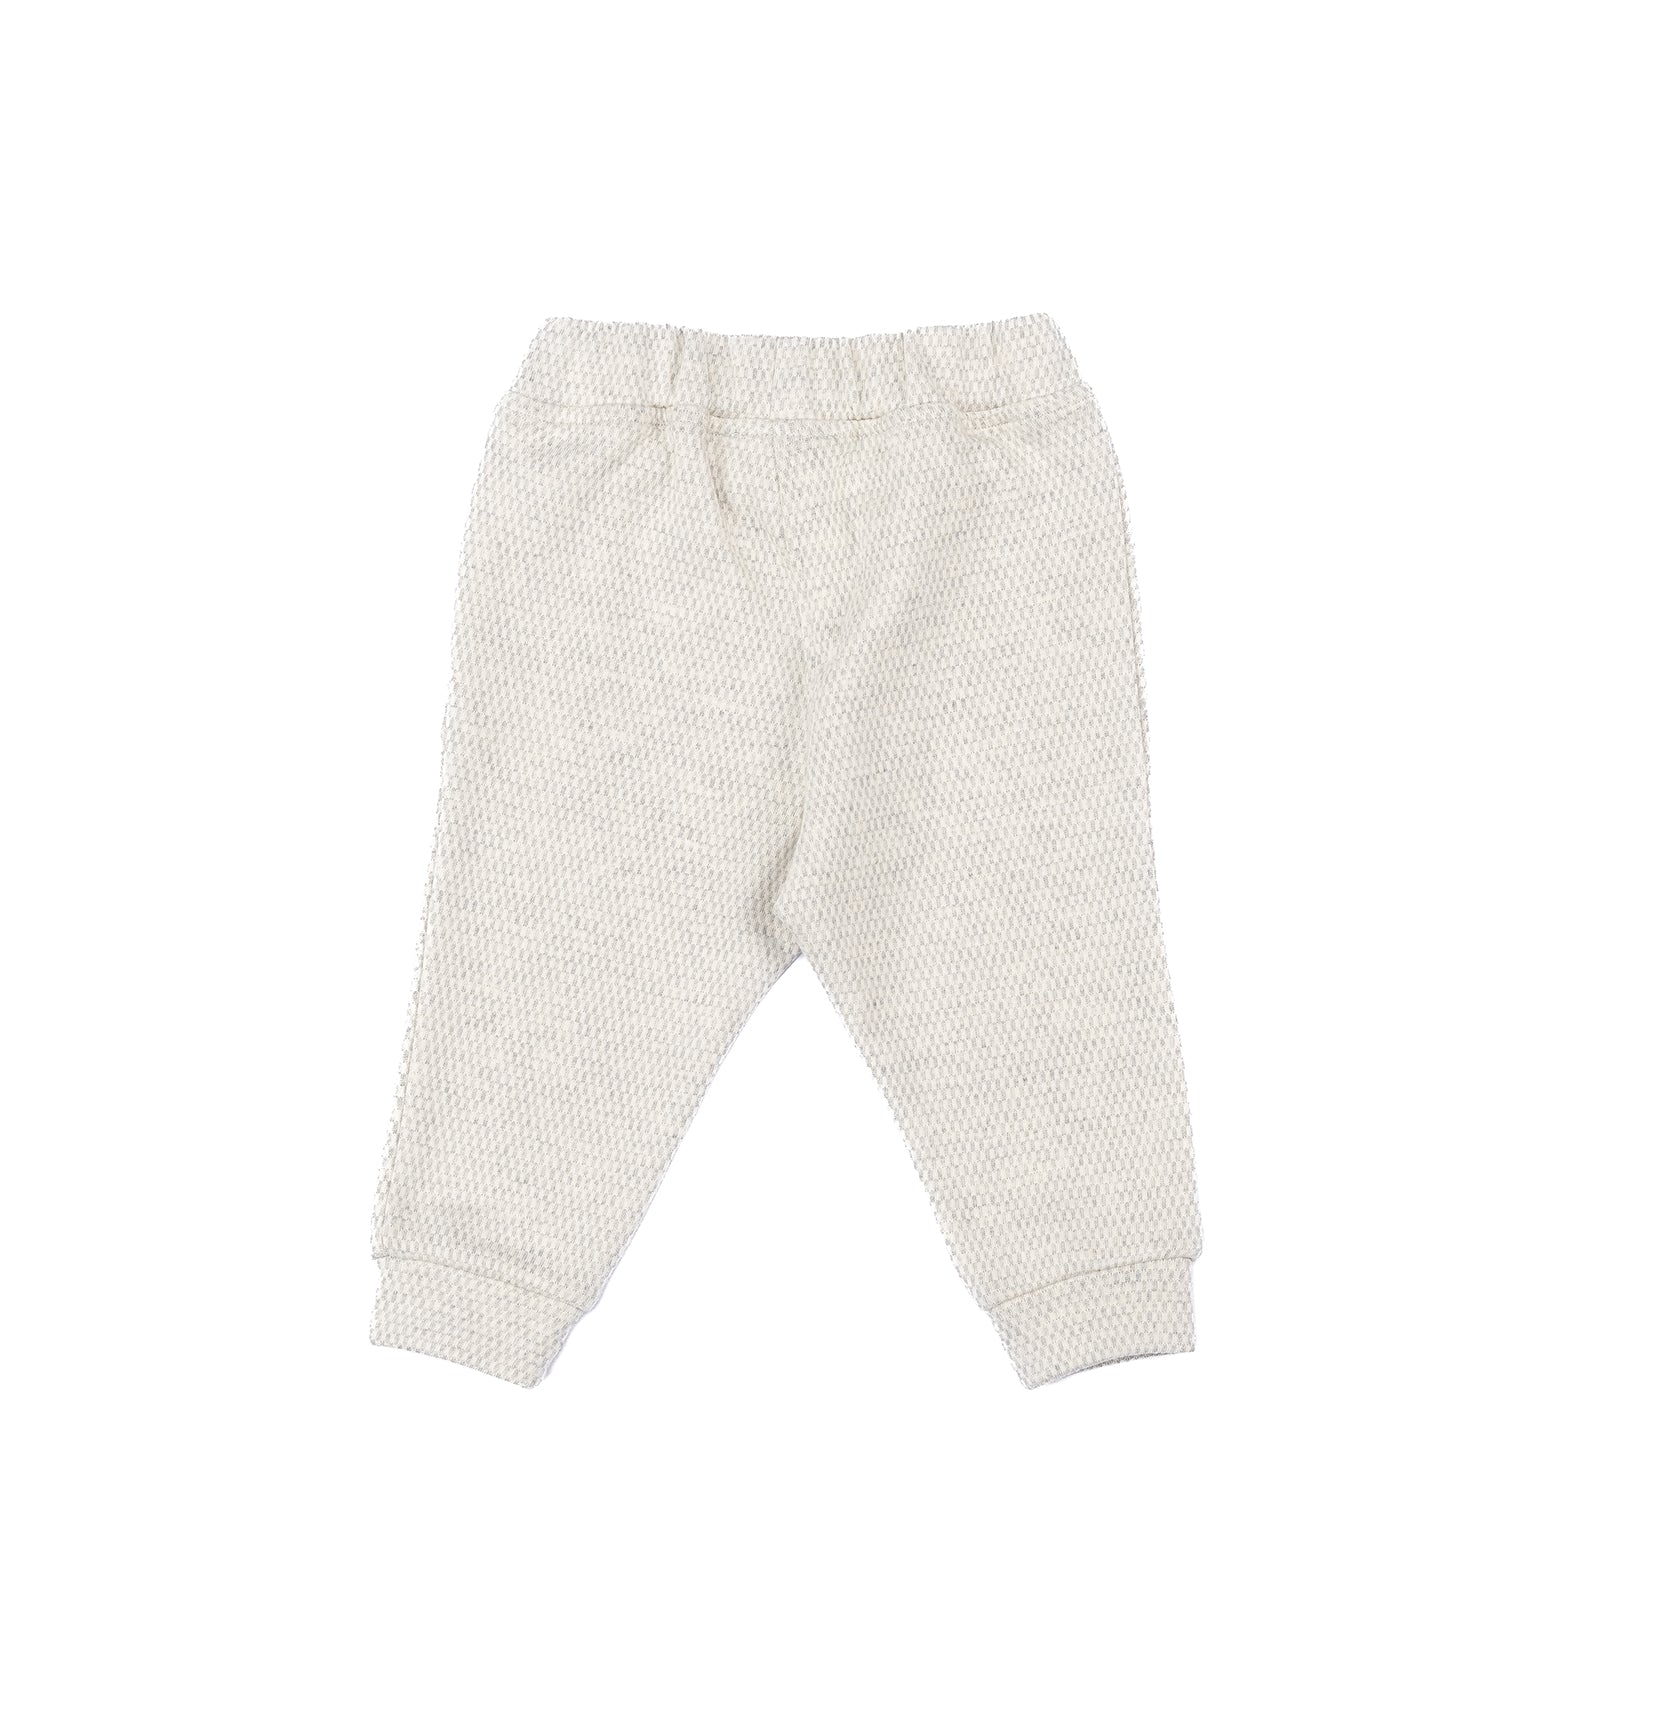 Fashionable stripped Babyboy pants by Pompelo